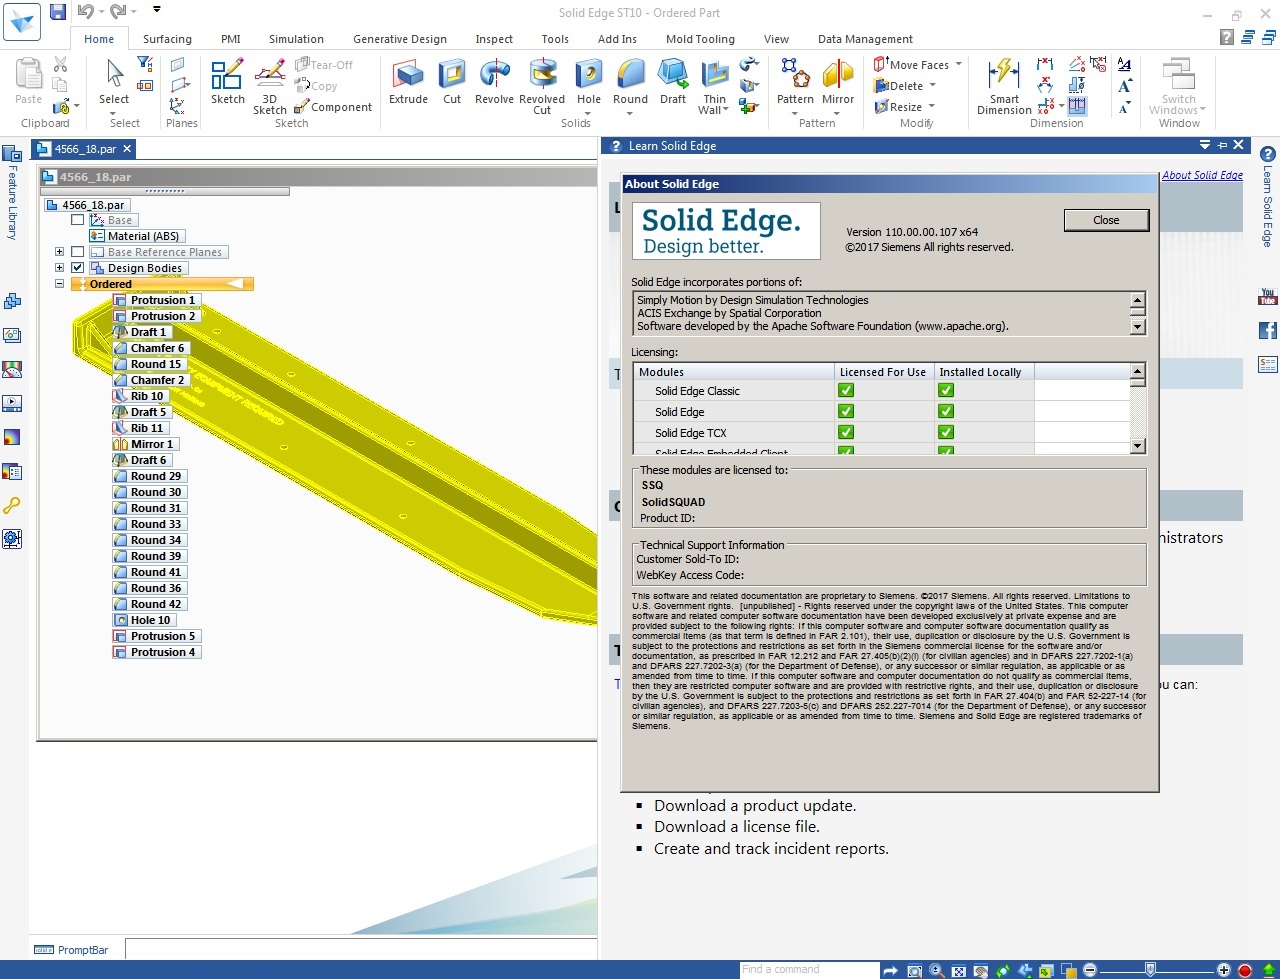 Design with Siemens Solid Edge ST10 full license